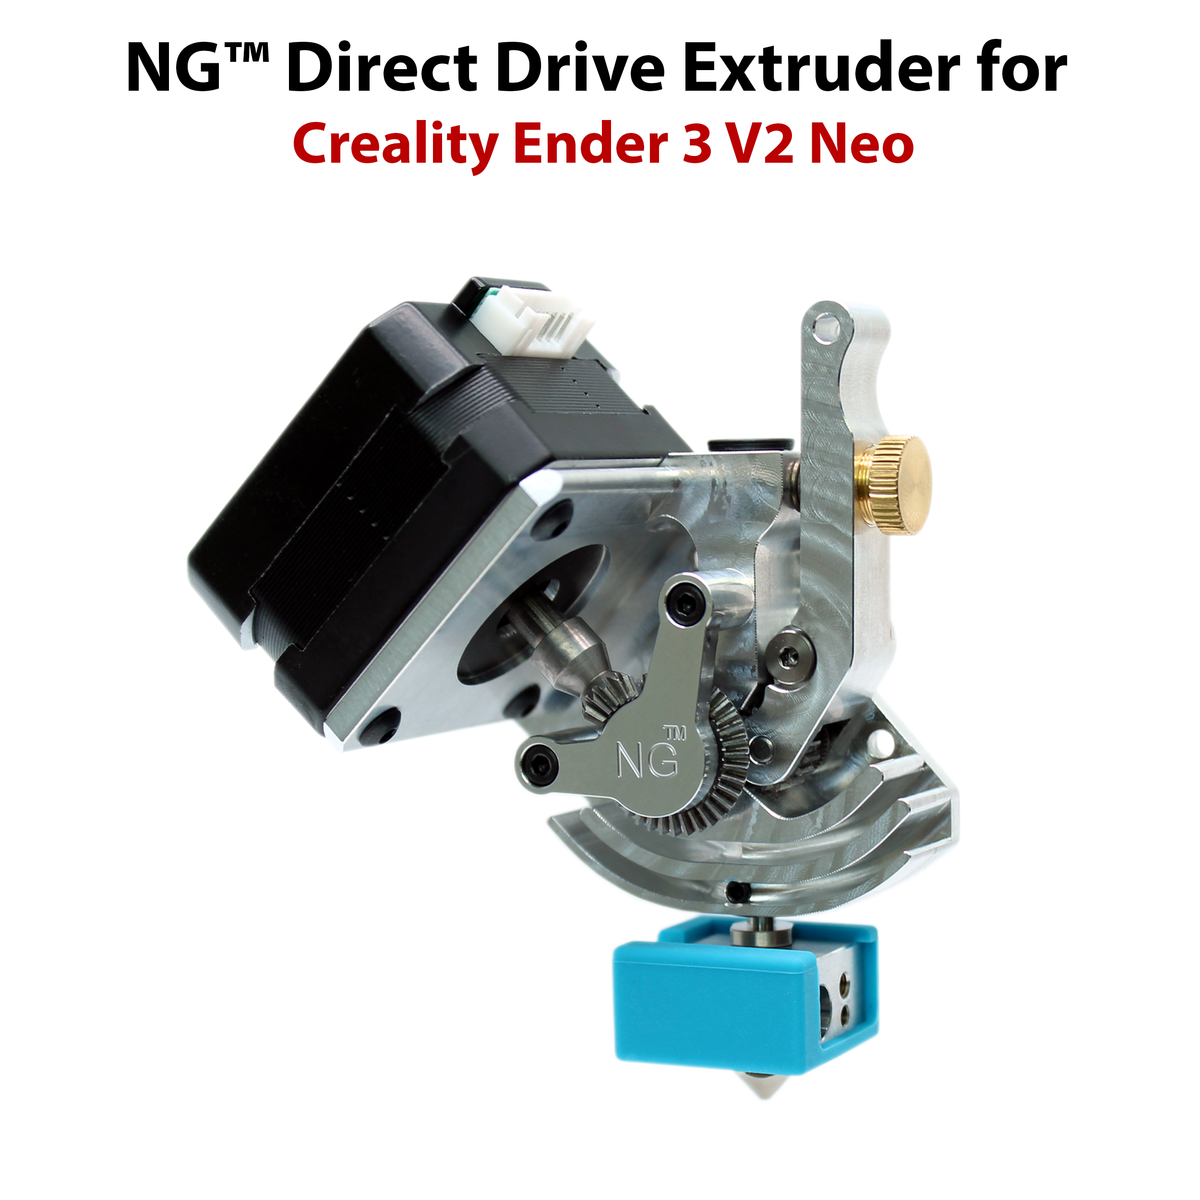 Micro Swiss NG™ Direct Drive Extruder for Creality Ender 3 V2 Neo — Micro  Swiss Online Store